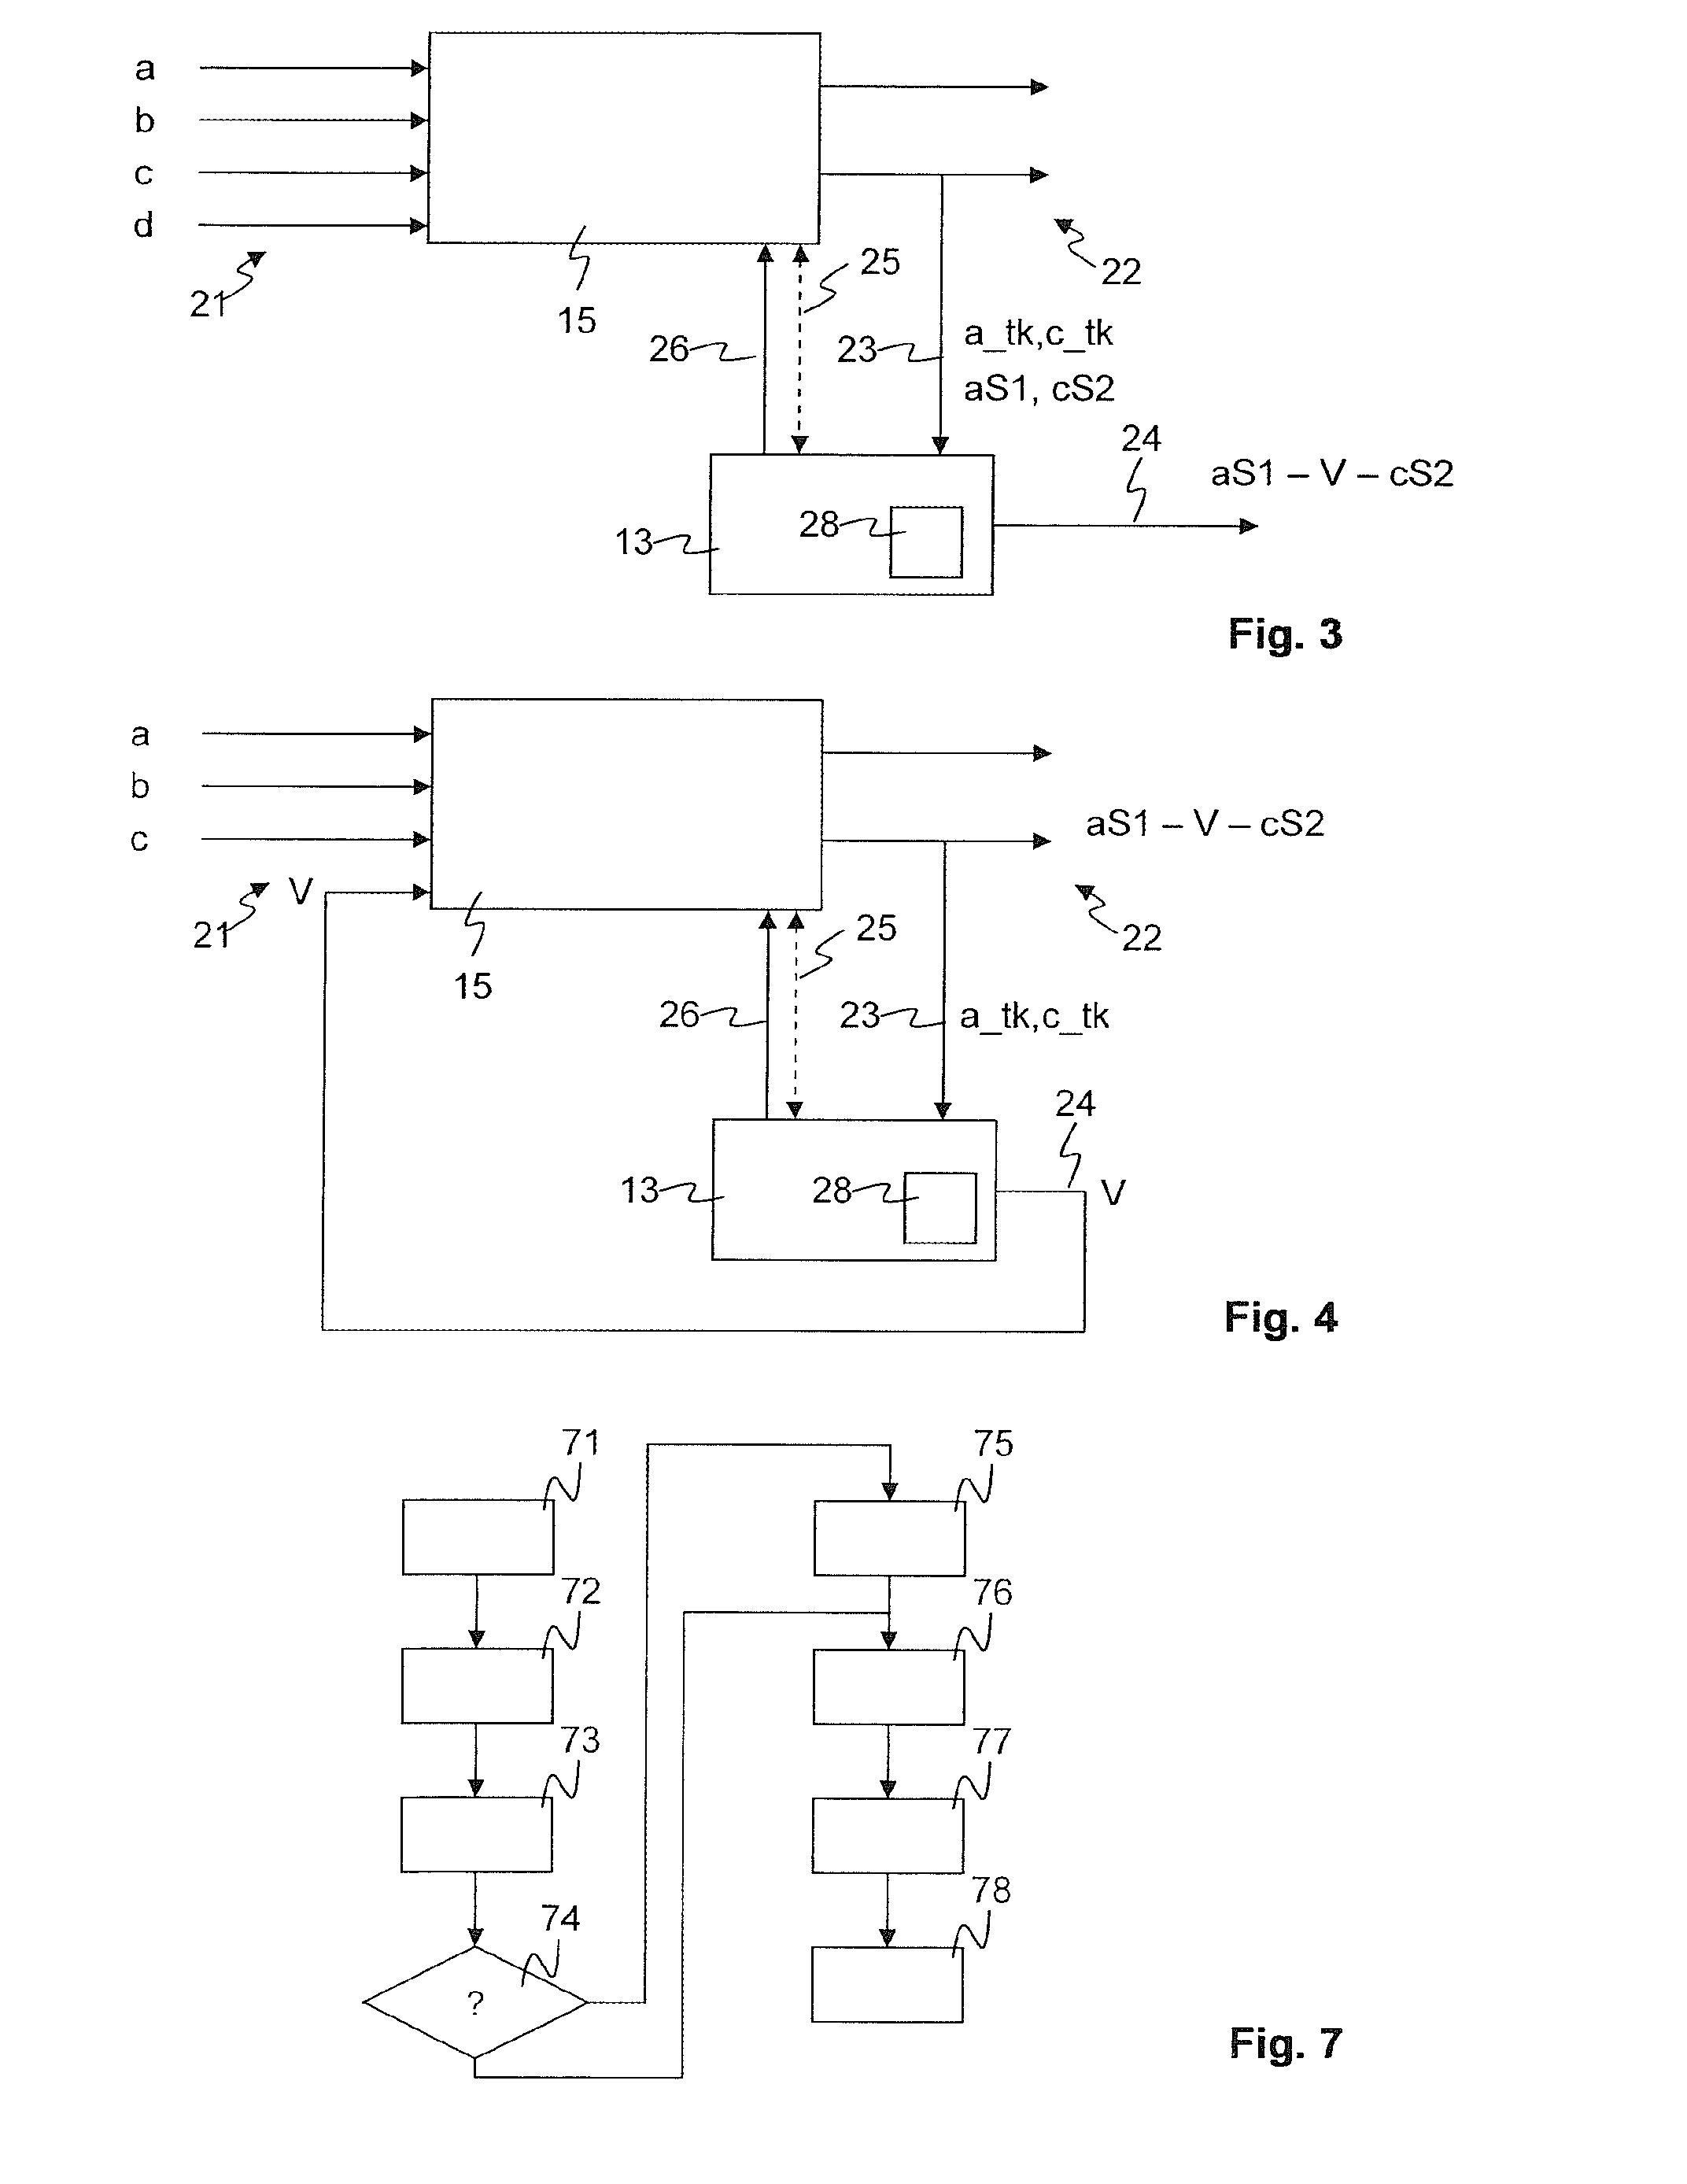 Image processing method and device for instant replay